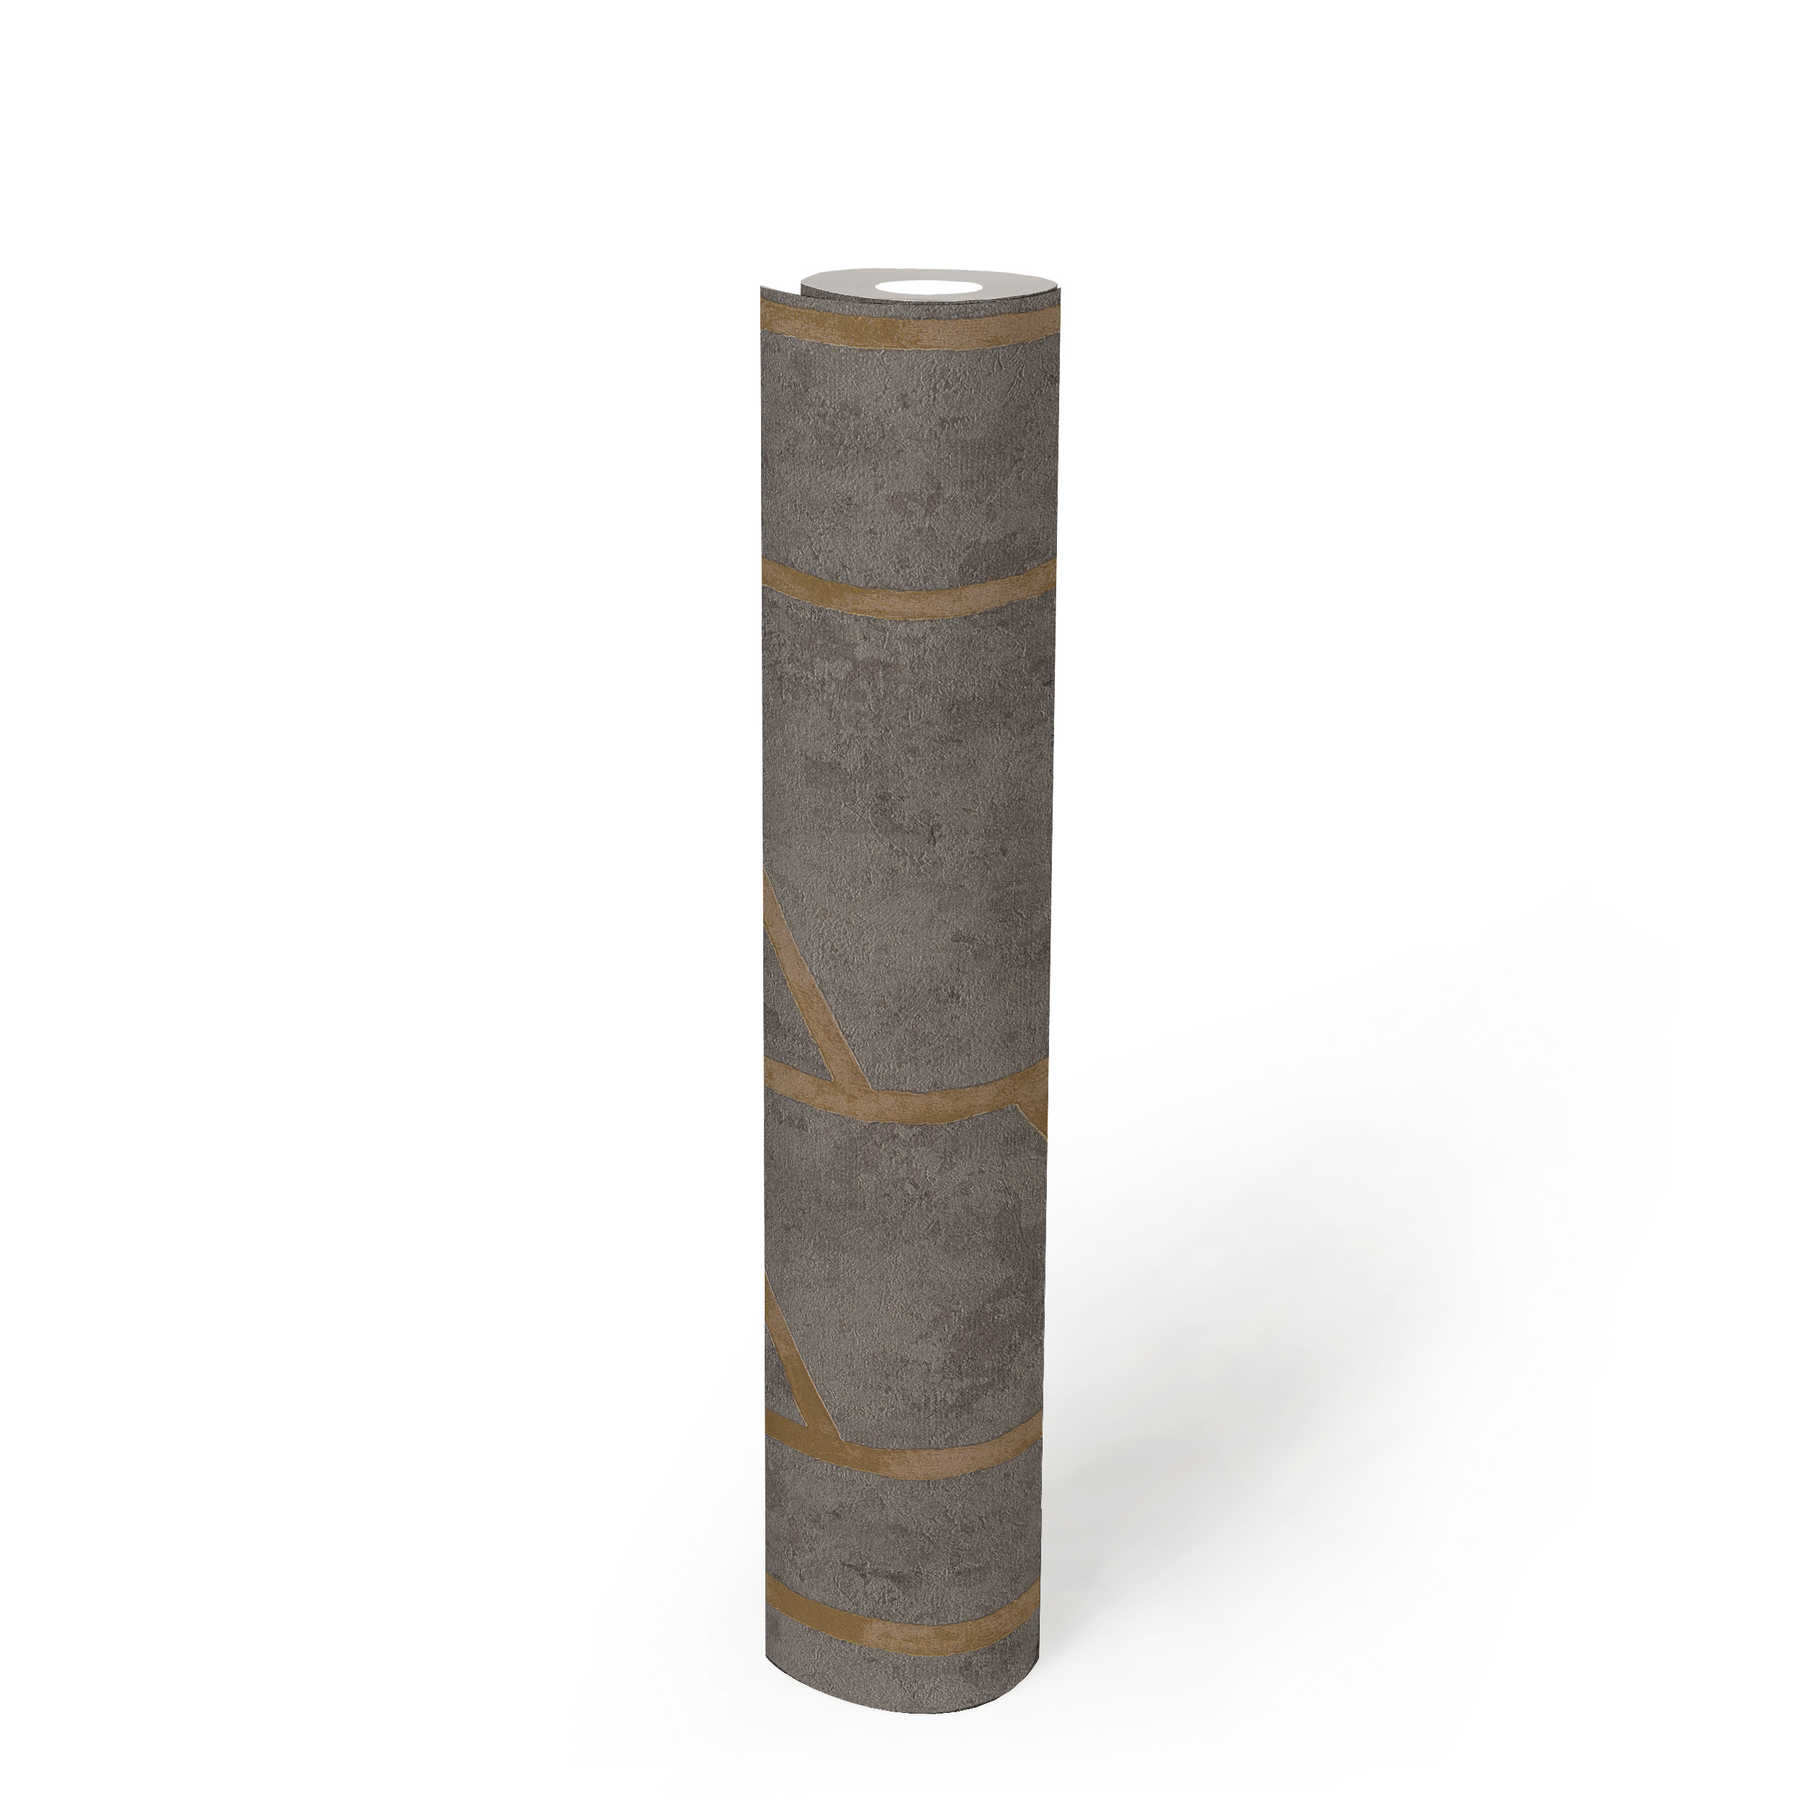             Concrete wallpaper with golden lines pattern - grey, gold
        